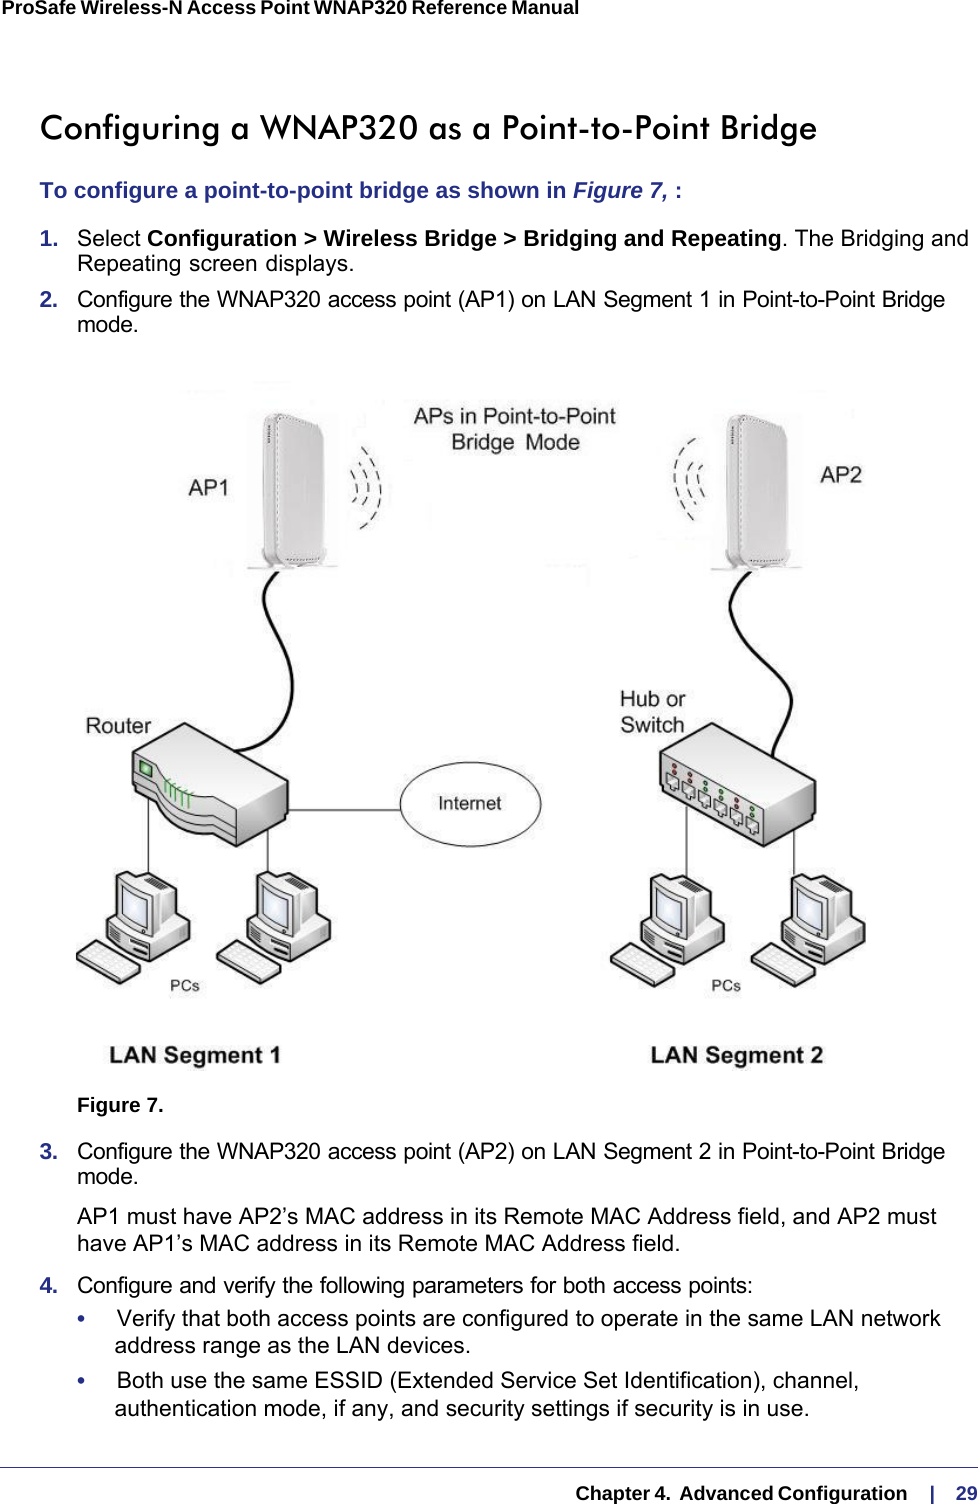   Chapter 4.  Advanced Configuration     |    29ProSafe Wireless-N Access Point WNAP320 Reference Manual Configuring a WNAP320 as a Point-to-Point BridgeTo configure a point-to-point bridge as shown in Figure  7, :1.  Select Configuration &gt; Wireless Bridge &gt; Bridging and Repeating. The Bridging and Repeating screen displays.2.  Configure the WNAP320 access point (AP1) on LAN Segment 1 in Point-to-Point Bridge mode.Figure 7.  3.  Configure the WNAP320 access point (AP2) on LAN Segment 2 in Point-to-Point Bridge mode. AP1 must have AP2’s MAC address in its Remote MAC Address field, and AP2 must have AP1’s MAC address in its Remote MAC Address field.4.  Configure and verify the following parameters for both access points:•     Verify that both access points are configured to operate in the same LAN network address range as the LAN devices.•     Both use the same ESSID (Extended Service Set Identification), channel, authentication mode, if any, and security settings if security is in use.